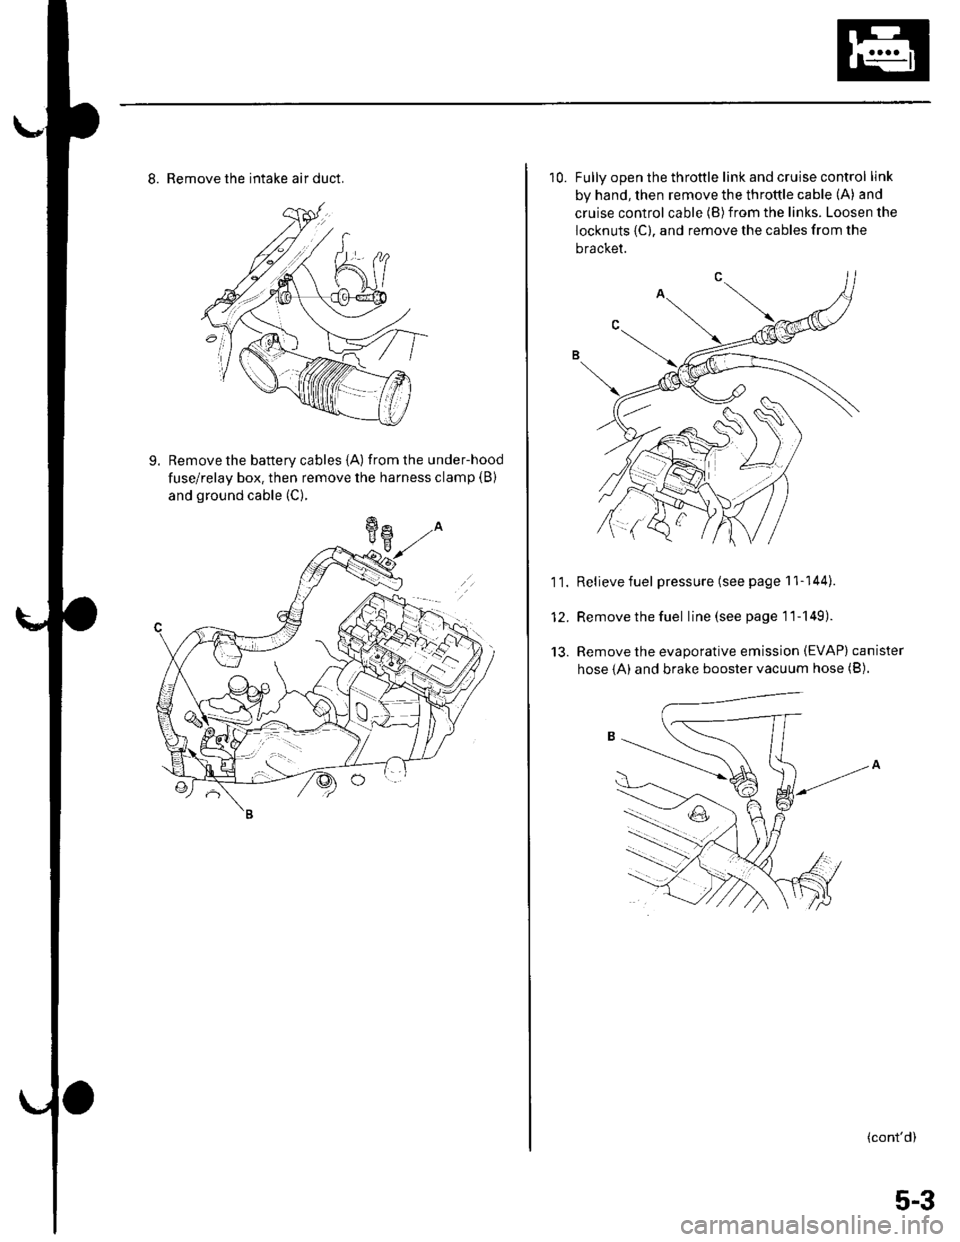 HONDA CIVIC 2003 7.G Workshop Manual 8. Remove the intake air duct.
9. Remove the battery cables {A) fromthe under-hood
fuse/relay box. then remove the harness clamp (B)
and ground cable (C).
10. Fullv ooen the throttle link and cruise c